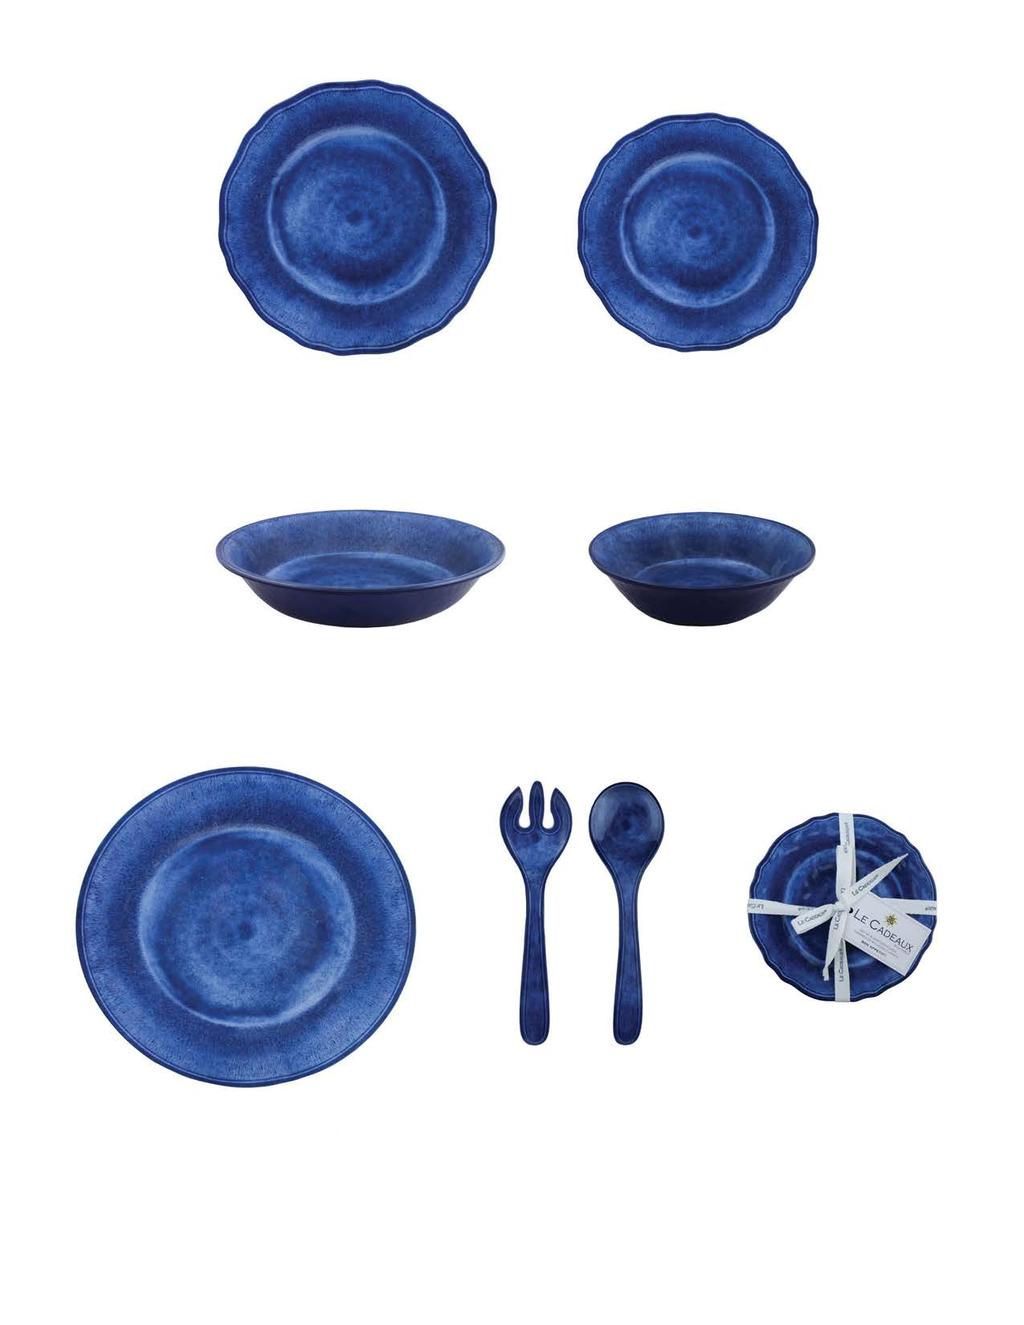 #227CAMB Blue 11 dinner plate #229CAMB Blue 9 salad plate #244CAMB